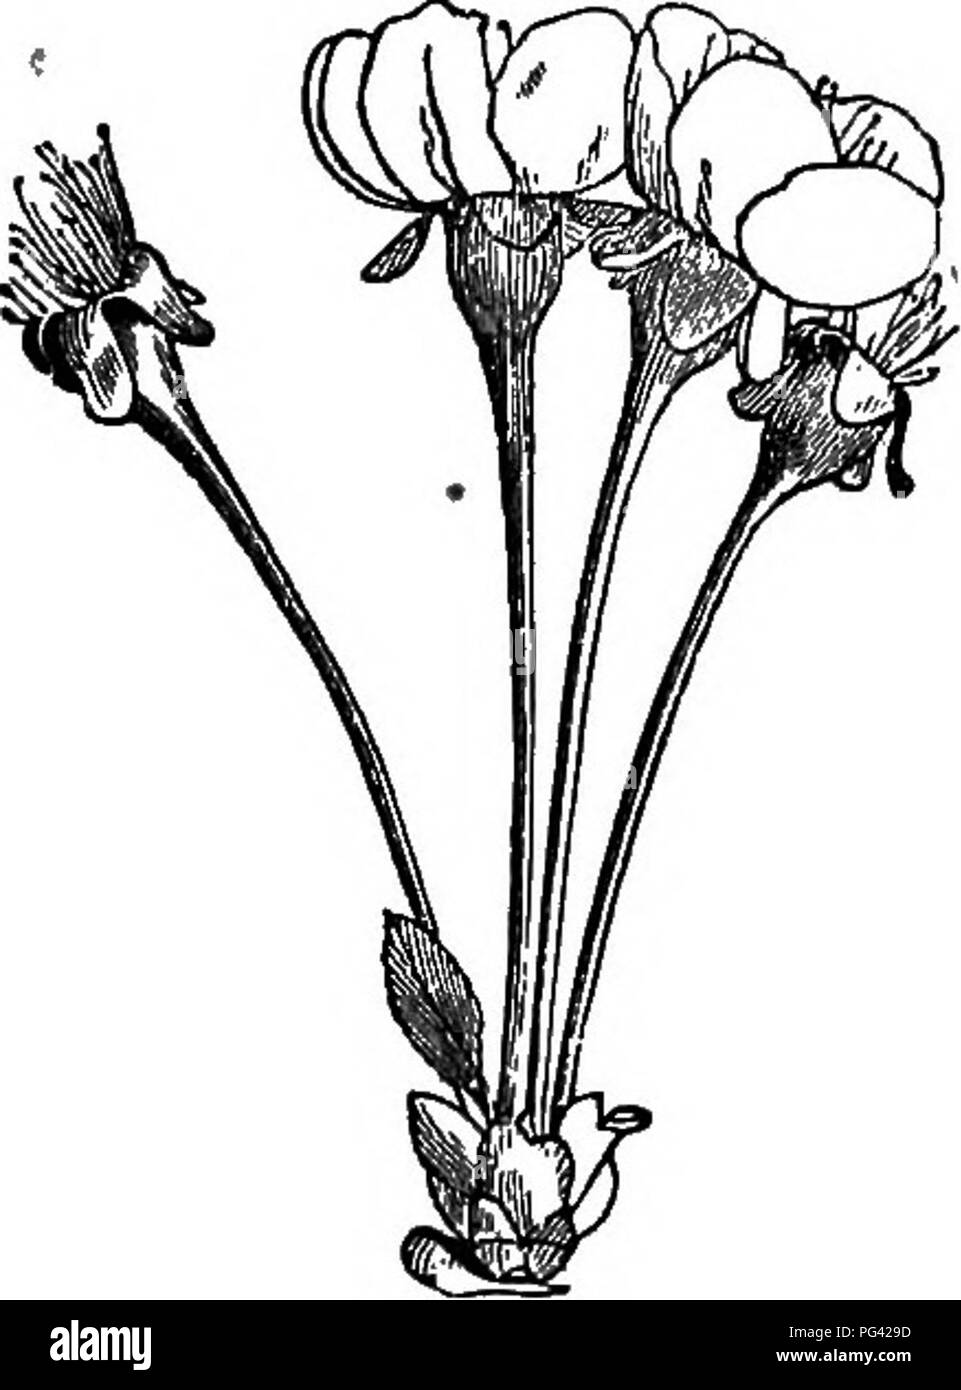 . Elements of botany. Botany; Botany. 132 ELEMENTS OF BOTANY. The Raceme and Belated Forms. â If the leaves along the stem â were to become very much dwarfed and the flowers brought closer together, as they frequently are, a kind of flower-cluster like that of the currant (Fig. 105) or the lily of the valley would result. Such an inflorescence is called a raceme; the main flower stalk is known as the peduncle ; the little individual flower stalks are pedicels, and the small, more or less scale-like leaves of the peduncle are hucts} Frequently the lower pedicels of a cluster on the general plan Stock Photo